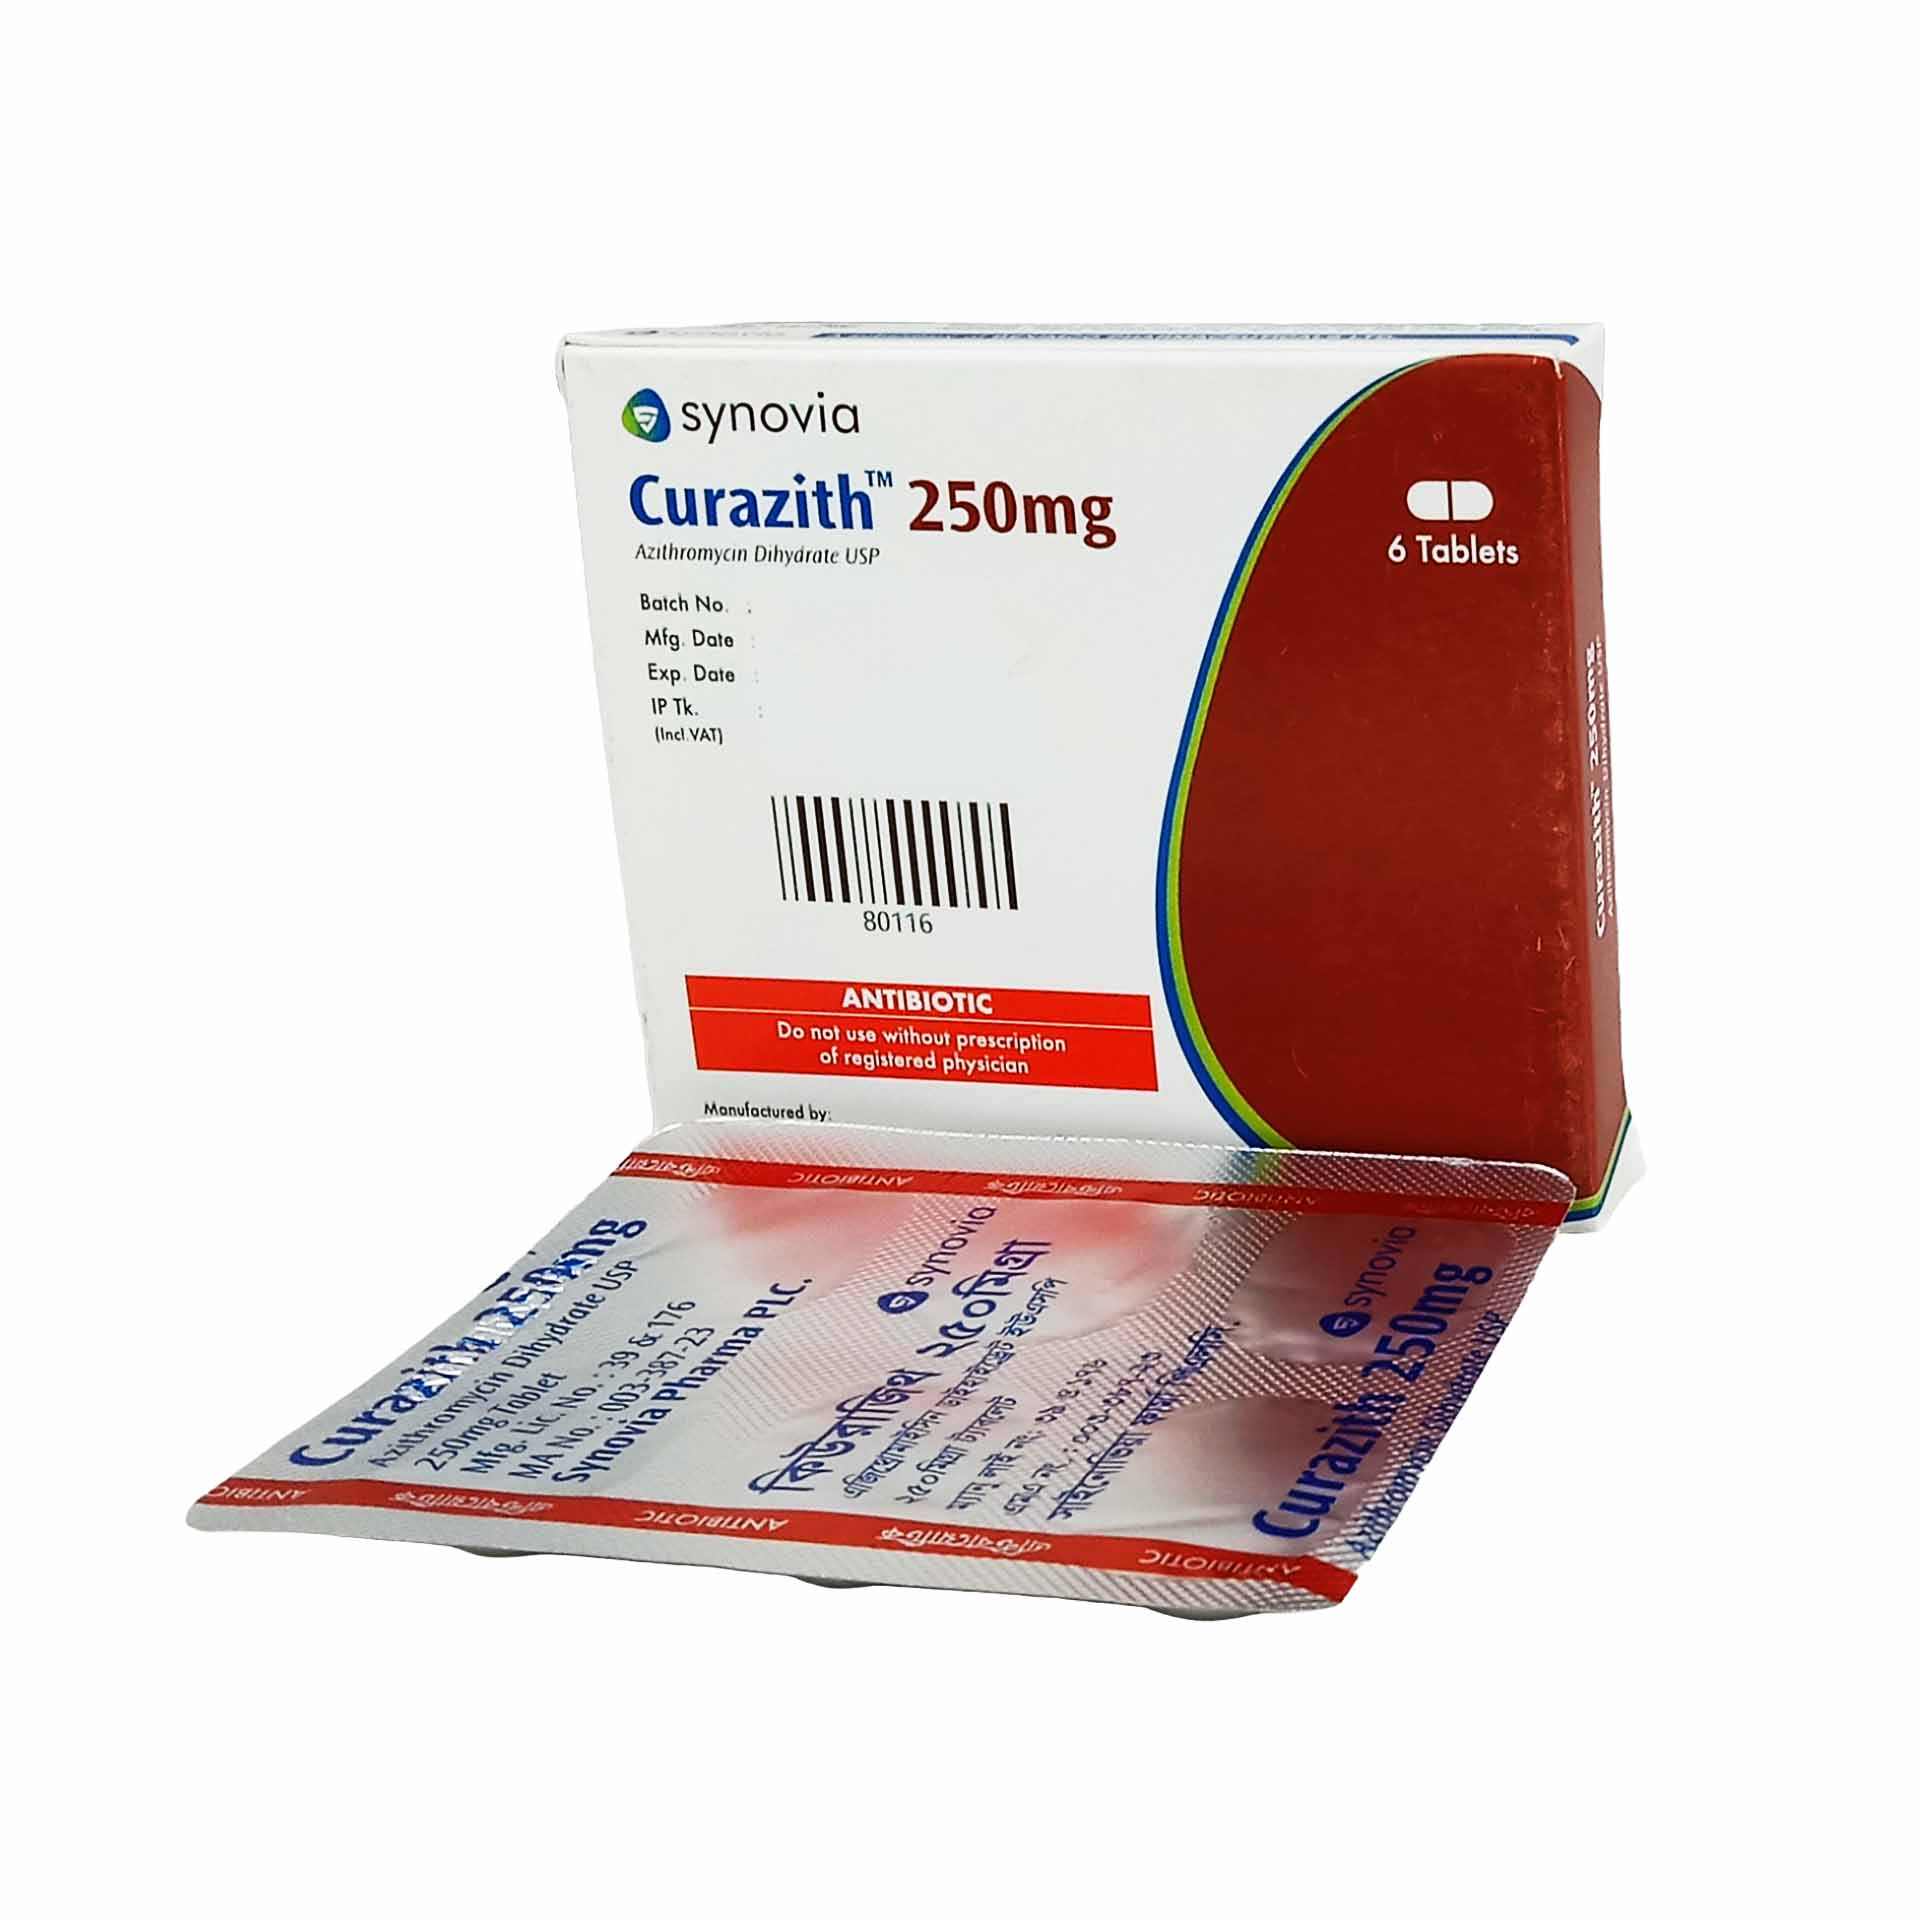 Curazith 250mg Tablet